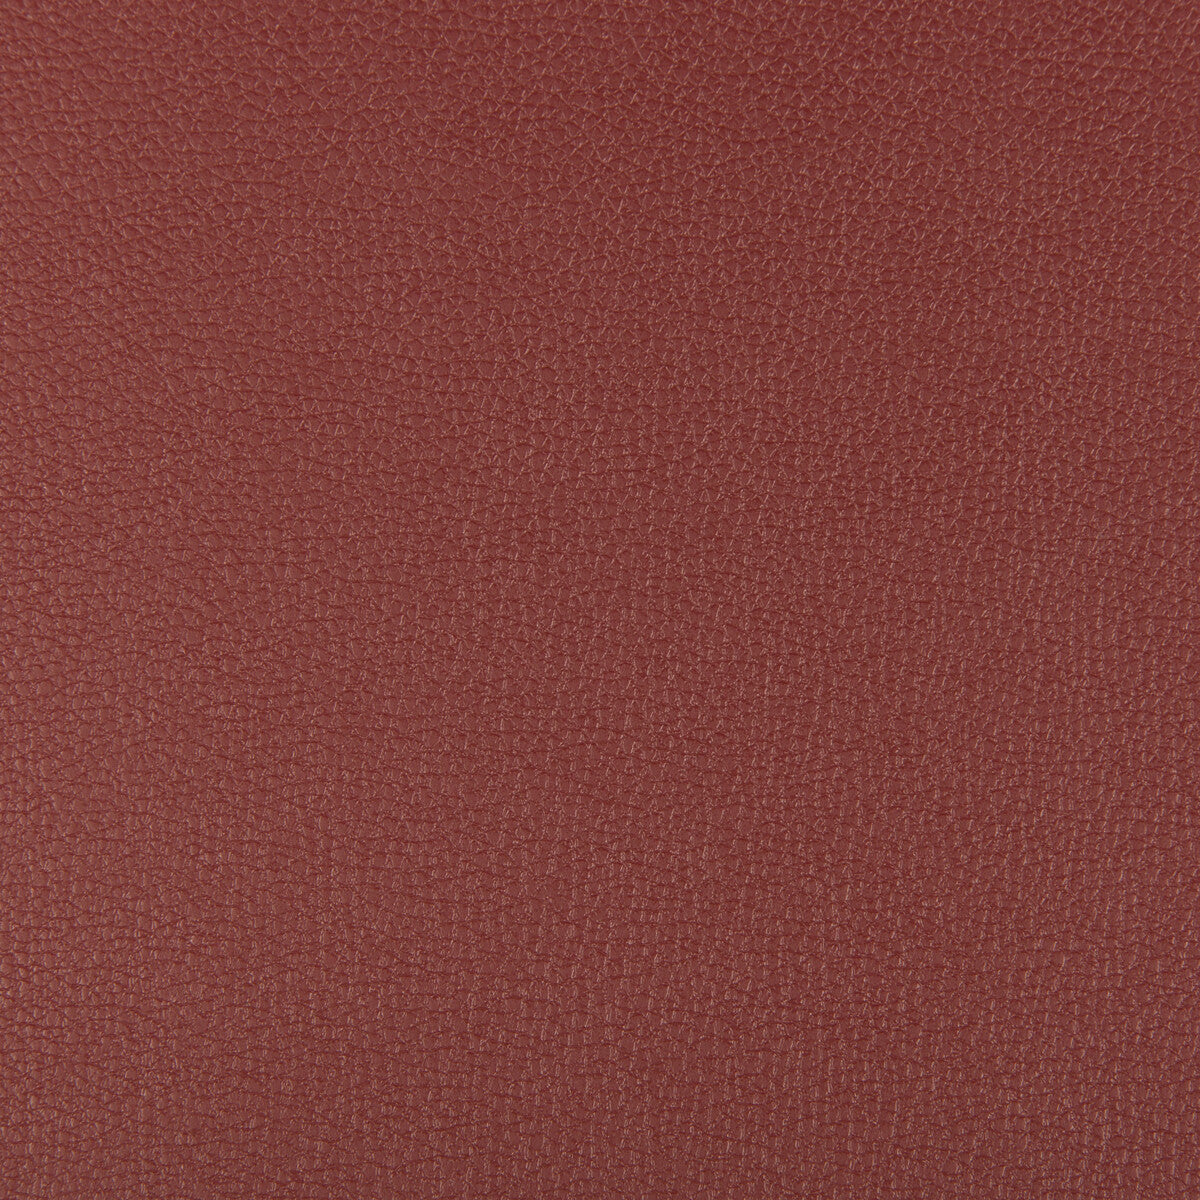 Syrus fabric in raisin color - pattern SYRUS.9.0 - by Kravet Contract